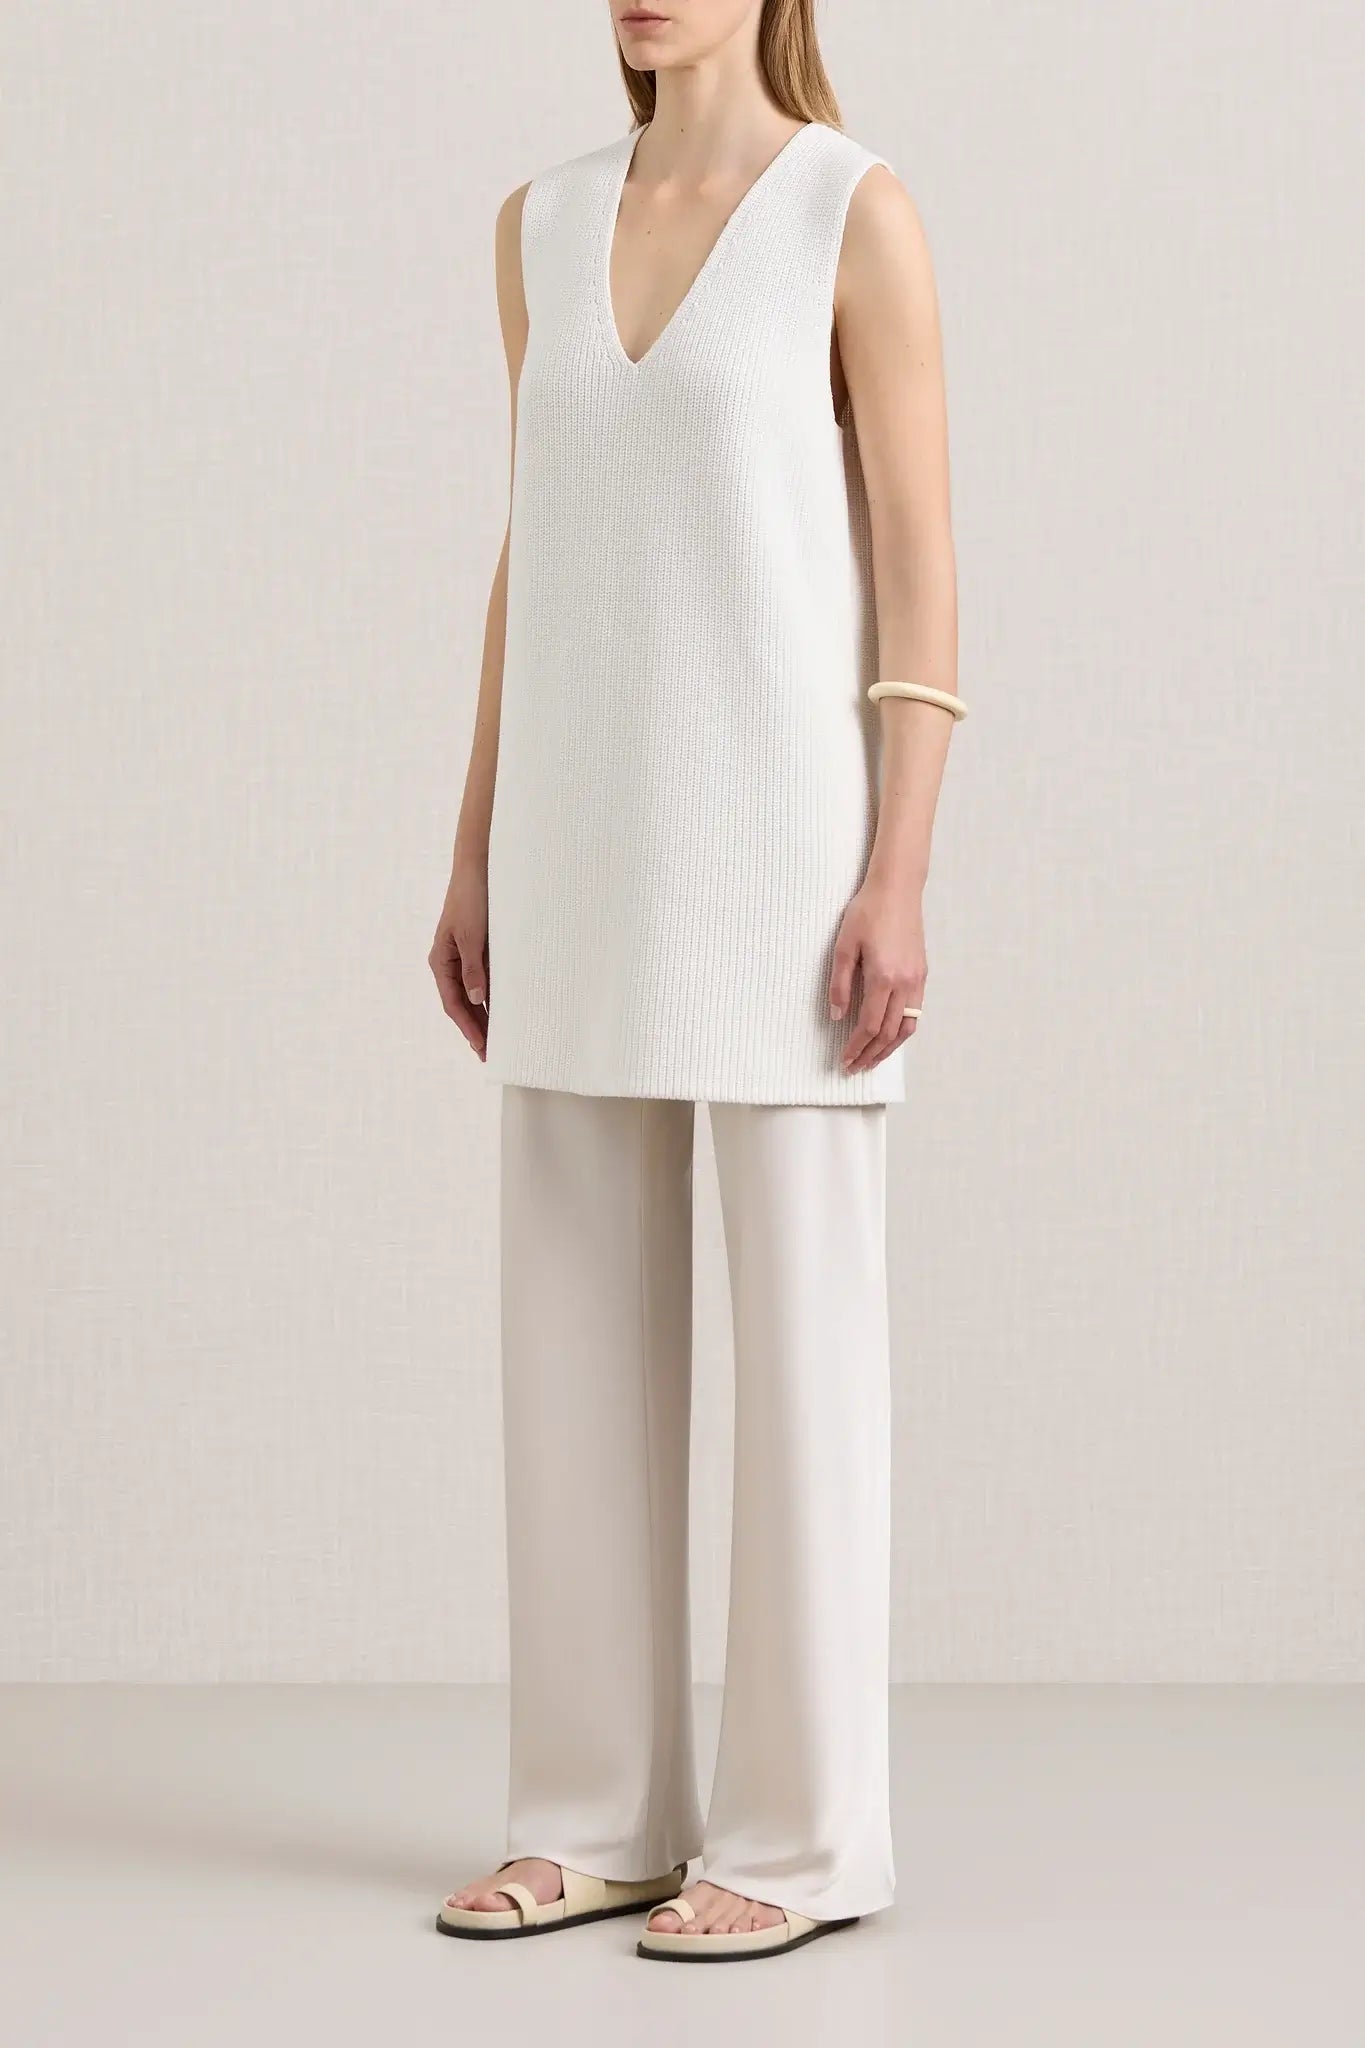 A.Emery Talman Knit in Parchment available at The New Trend Australia.